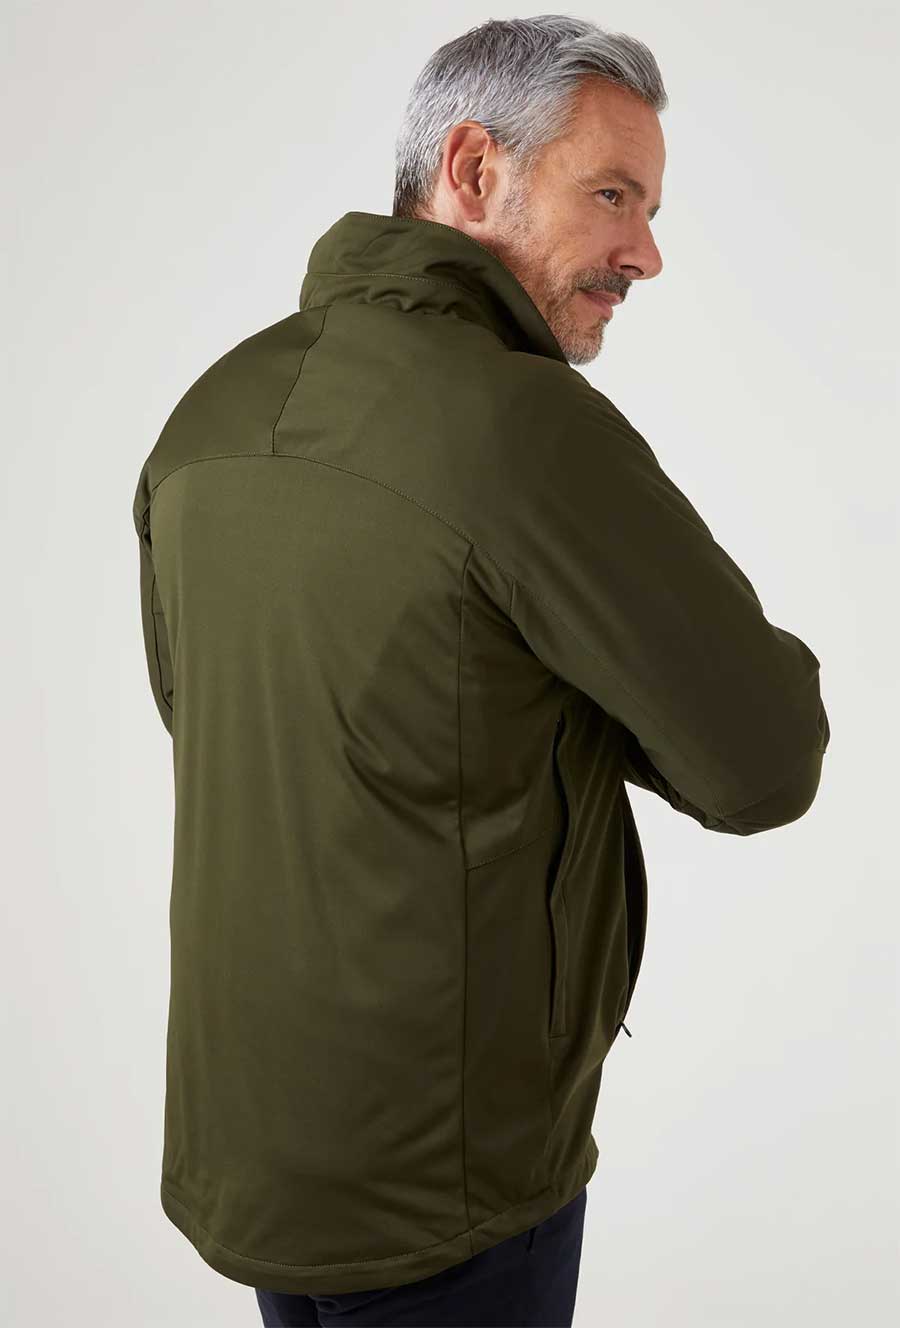 Back Detail Alan Paine Westermoor Softshell Jacket